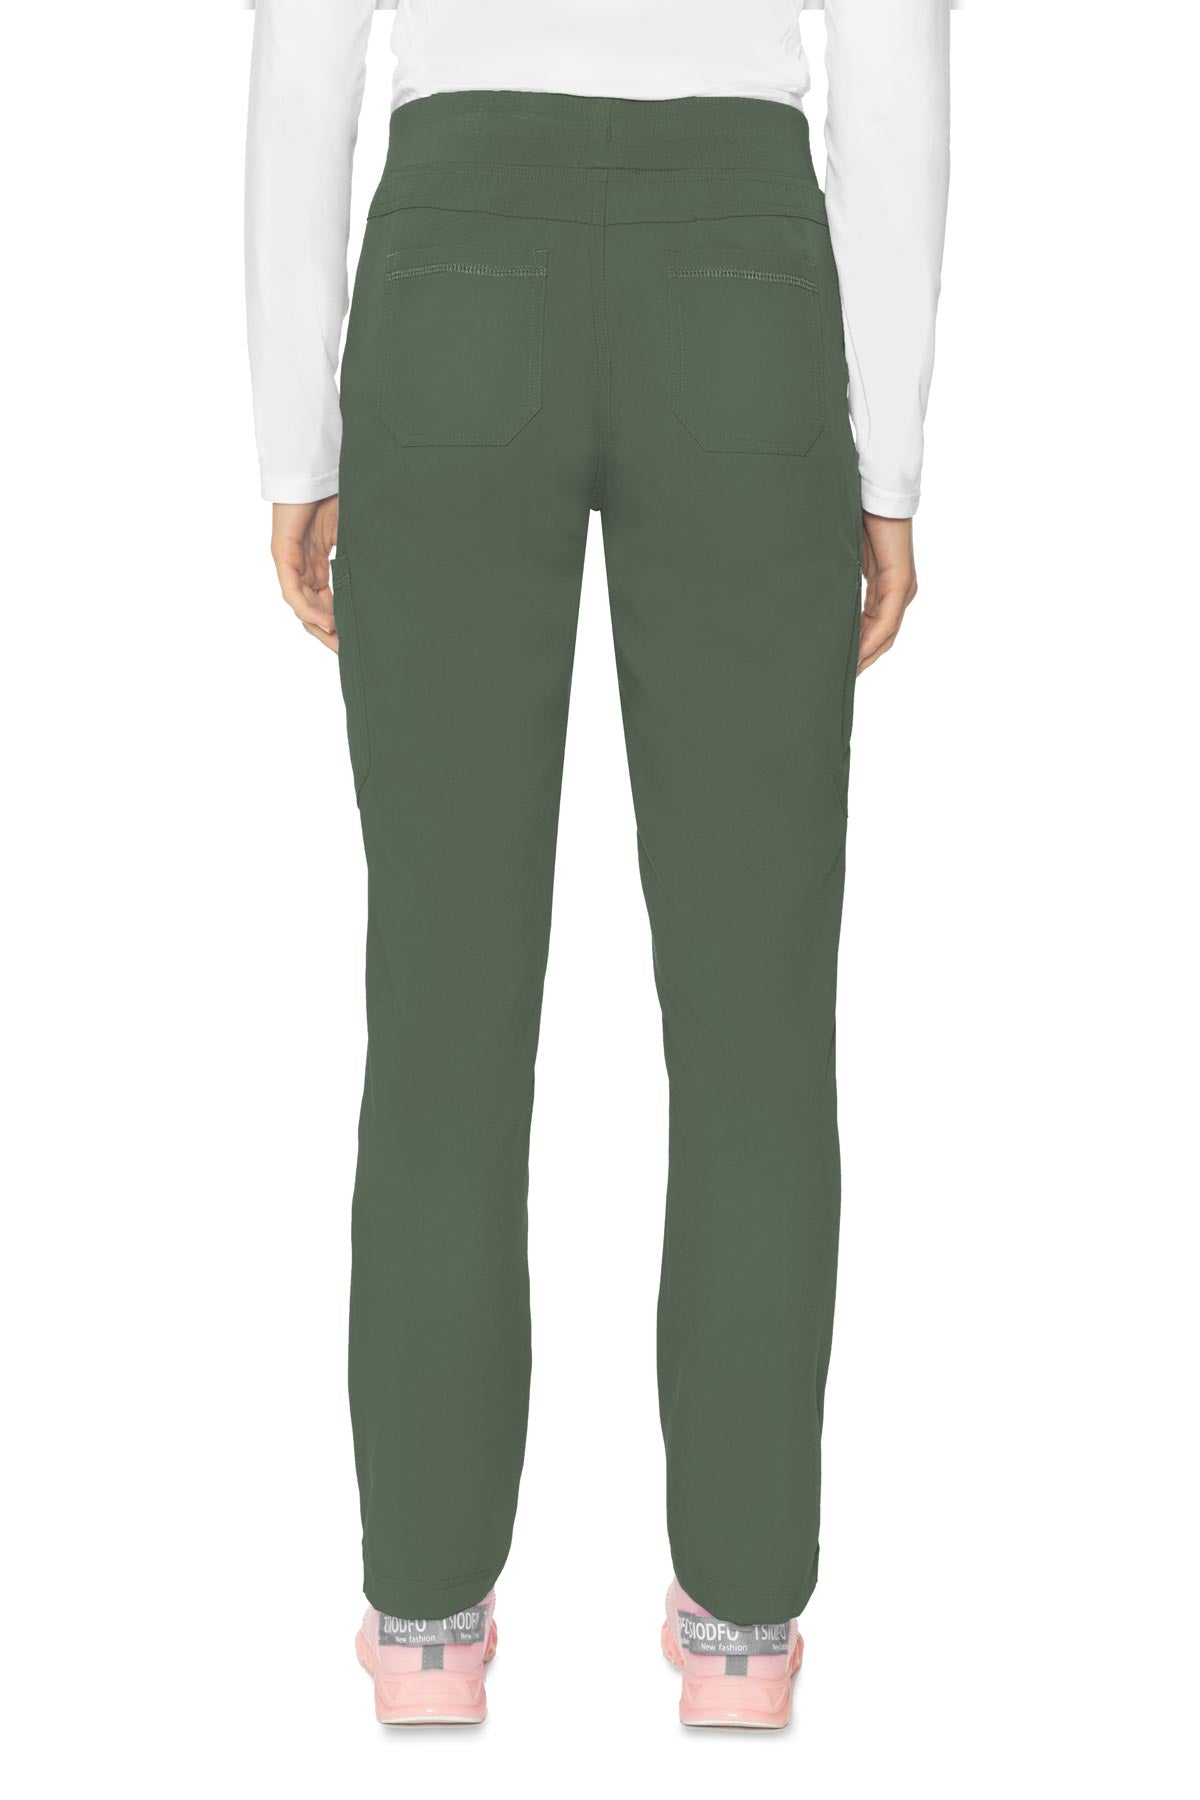 Med Couture Touch 7705 Women's Double Cargo Jogger Pant – Valley West  Uniforms